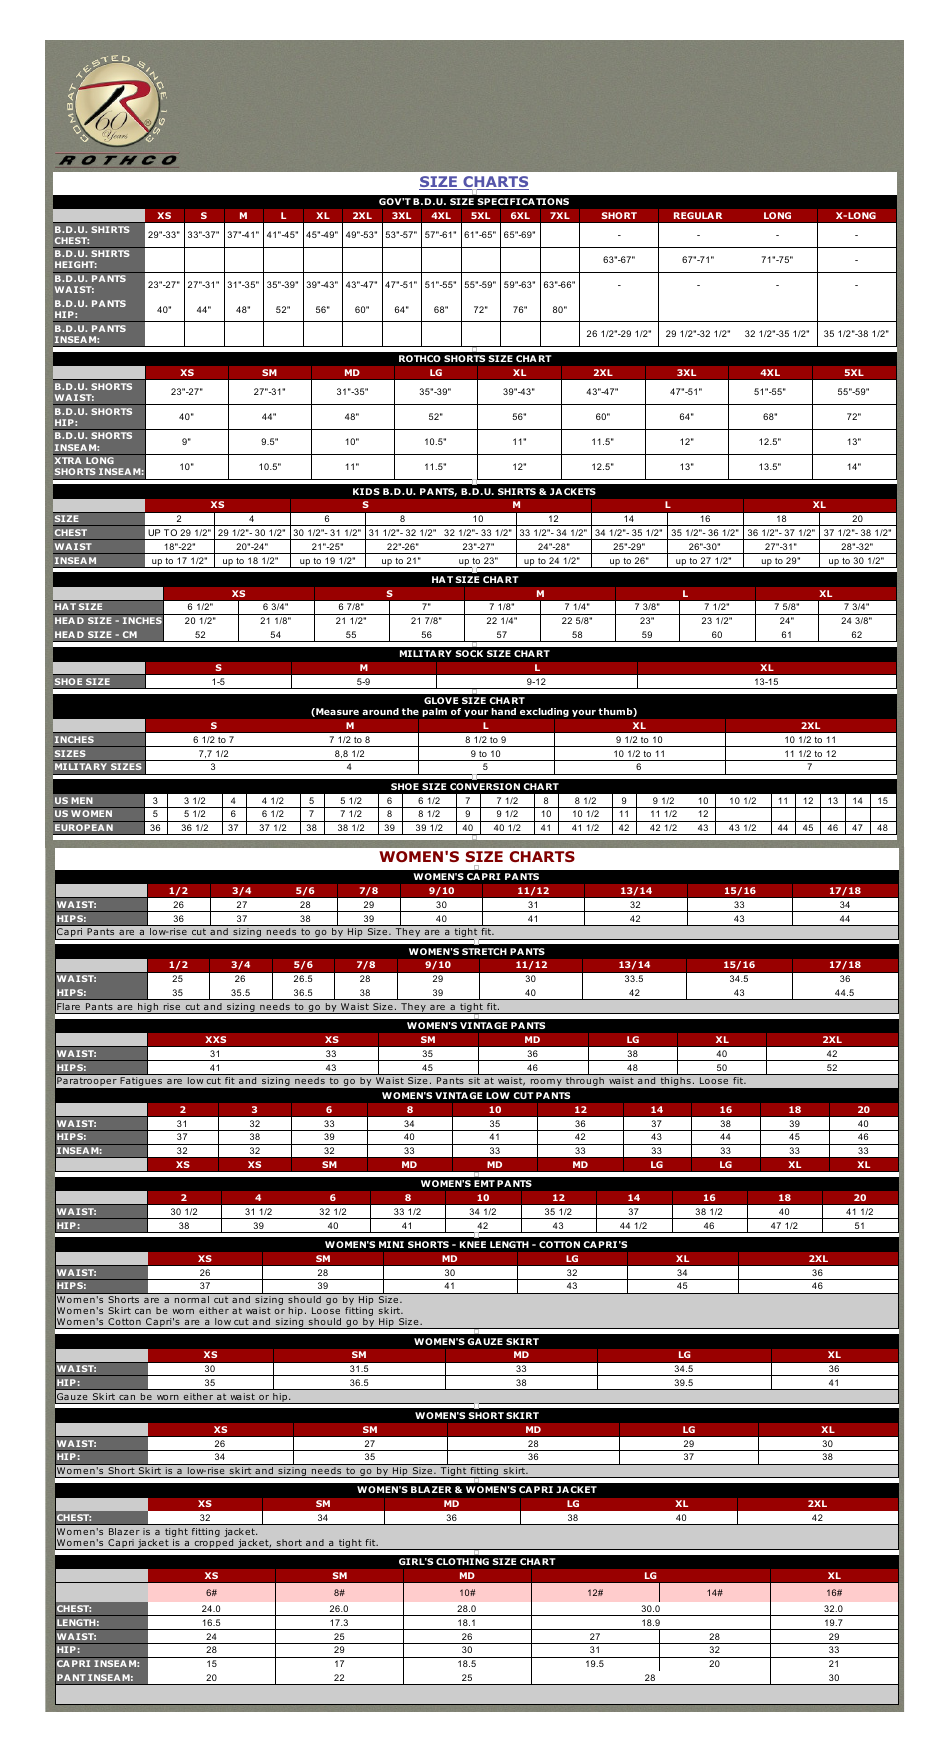 Tactical Gear Size Charts - Rothco, Page 1